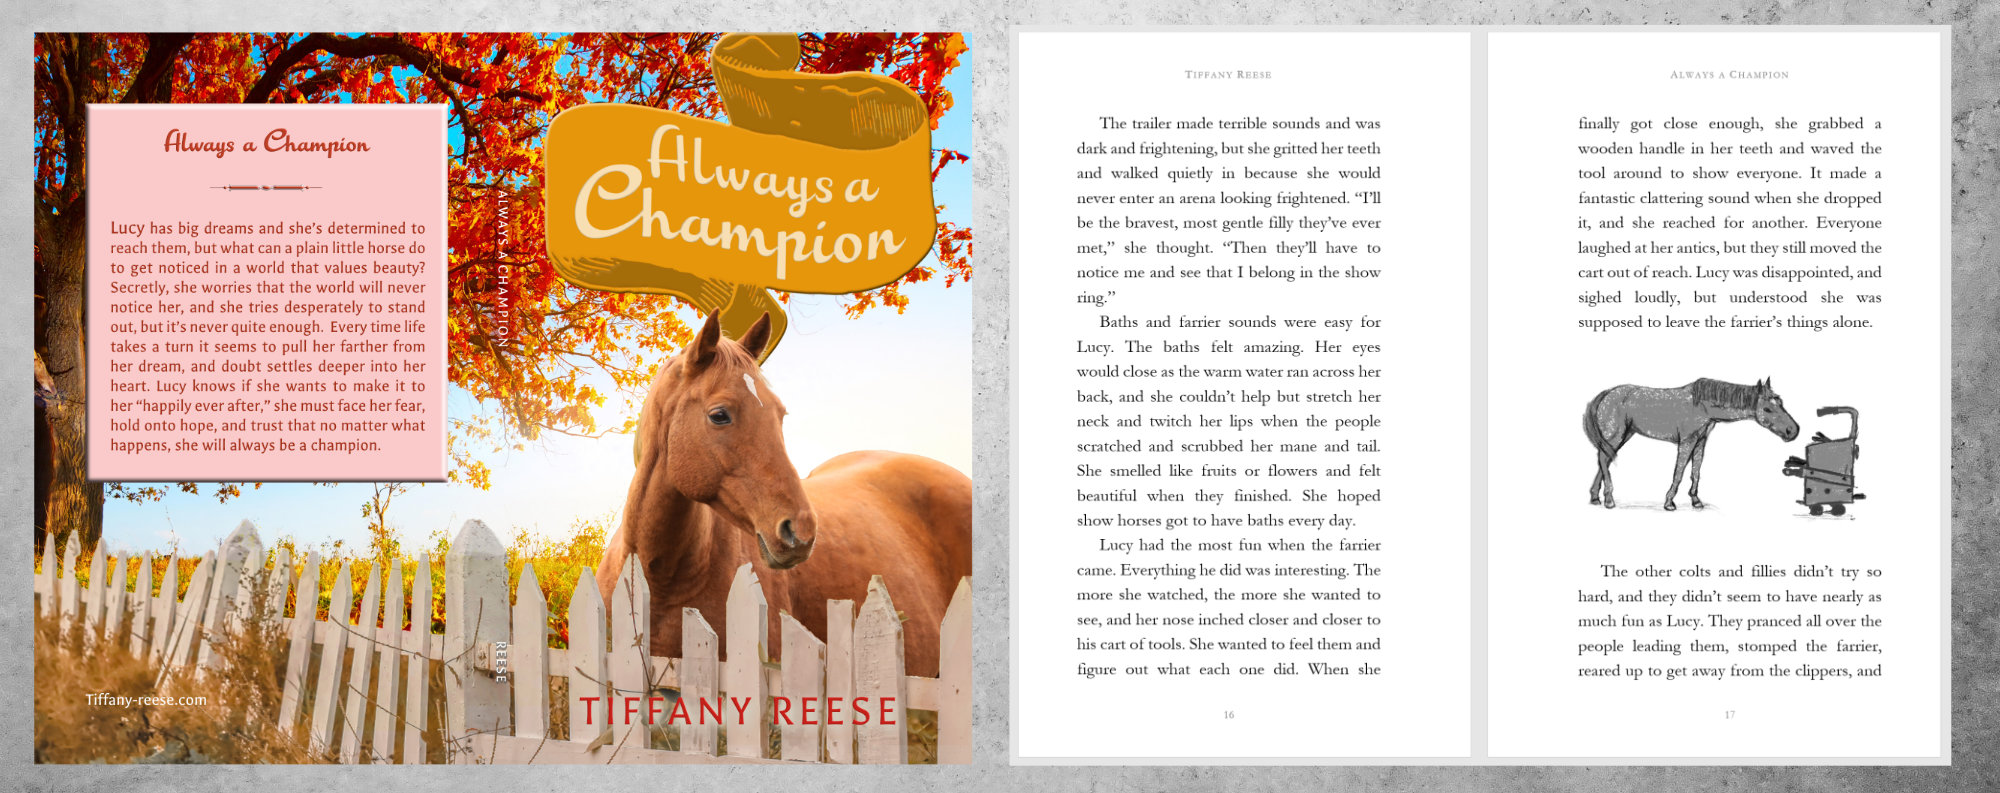 Example image of book Always a Champion by Tiffany Reese